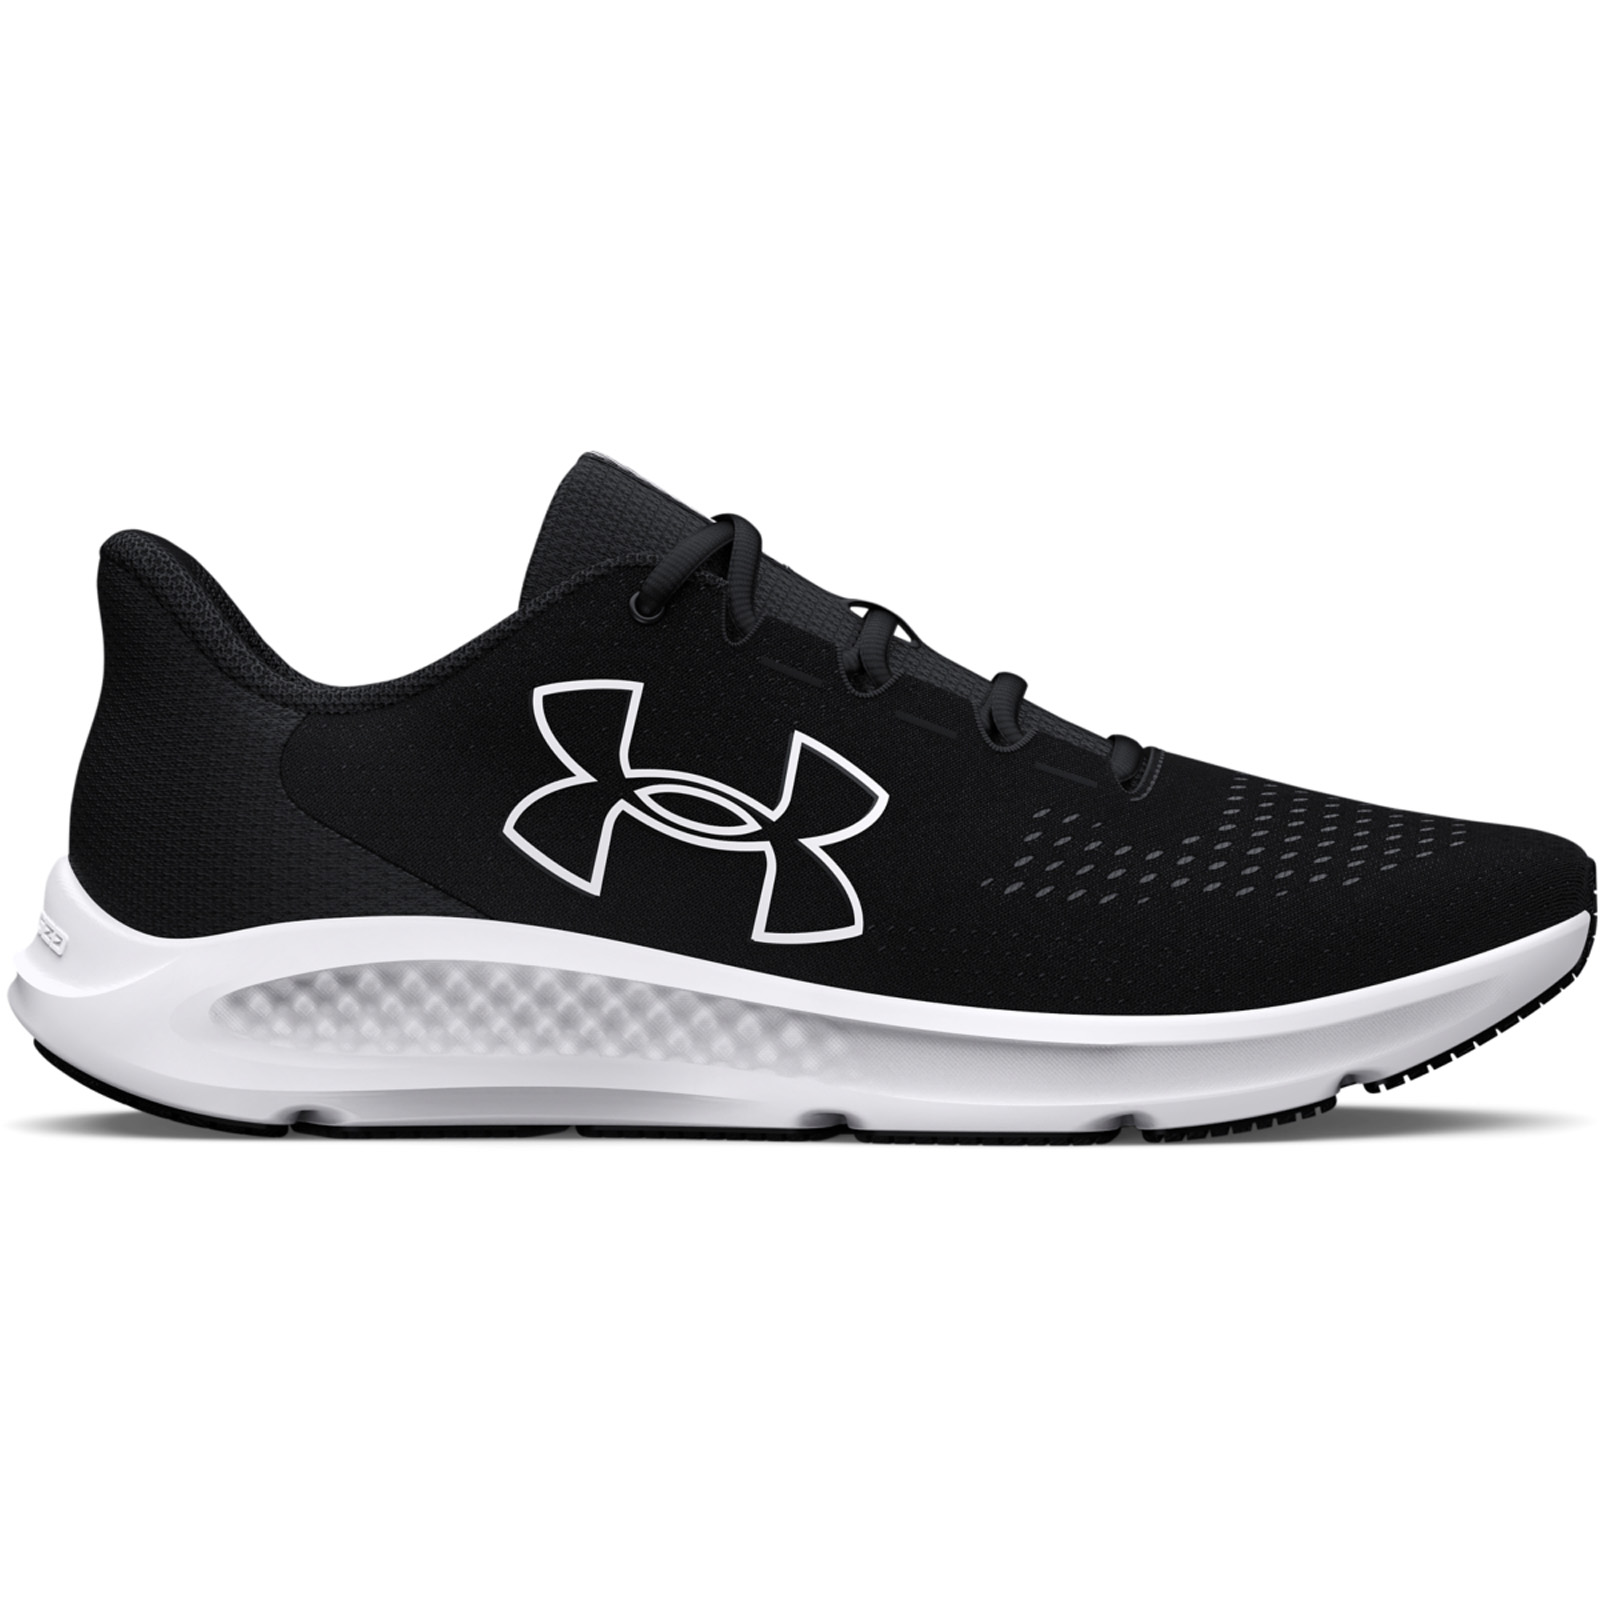 Under Armour - Men's UA Charged Pursuit 3 Big Logo Running Shoes - Black/Black/White Ανδρικά > Παπούτσια > Αθλητικά > Παπούτσι Low Cut